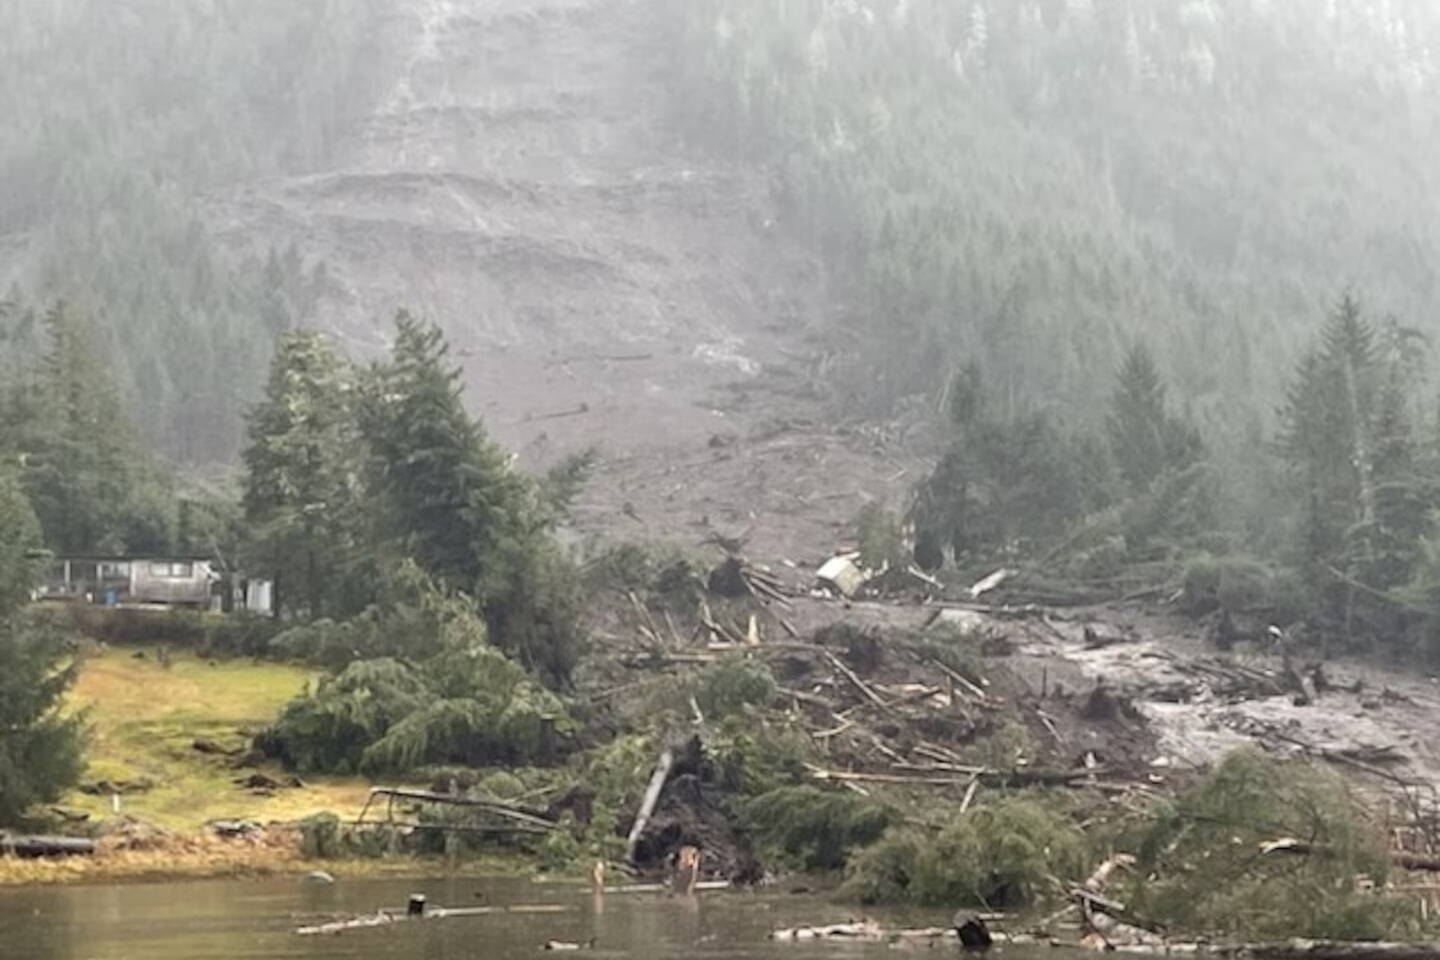 Debris from a massive landslide on Monday night extends into the sea at mile 11 on Zimovia Highway in Wrangell. Three people were killed and three more people are missing as of 5:15 p.m. Tuesday by the landslide that impacted three single-family homes, according to officials. (U.S. Coast Guard)